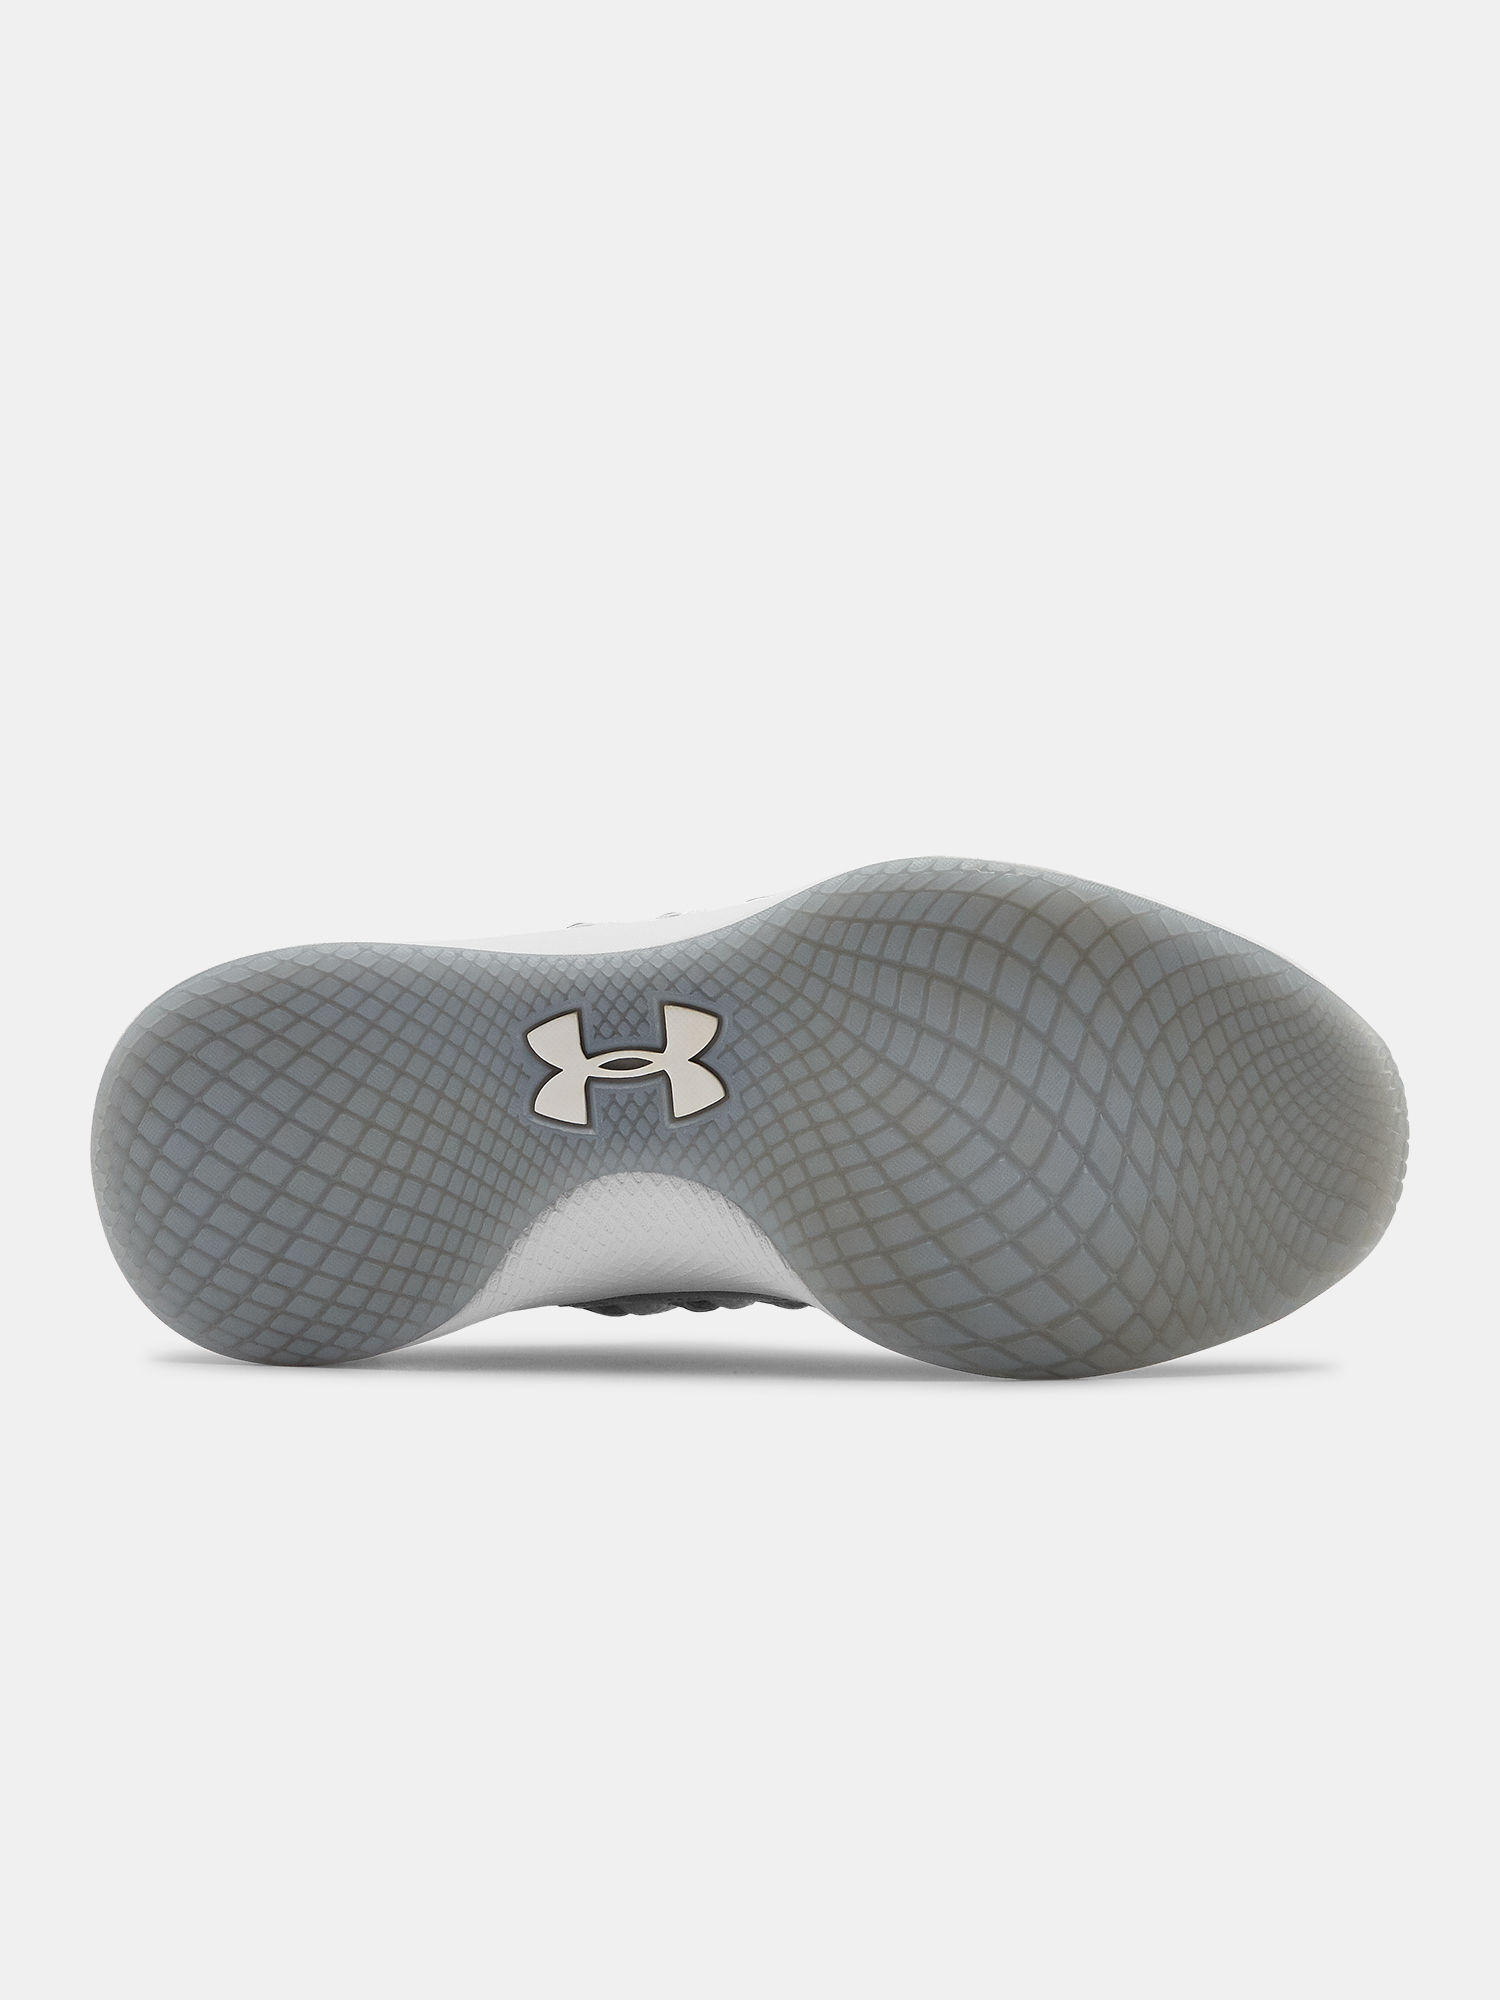 Boty Under Armour W Charged Breathe Ird (4)